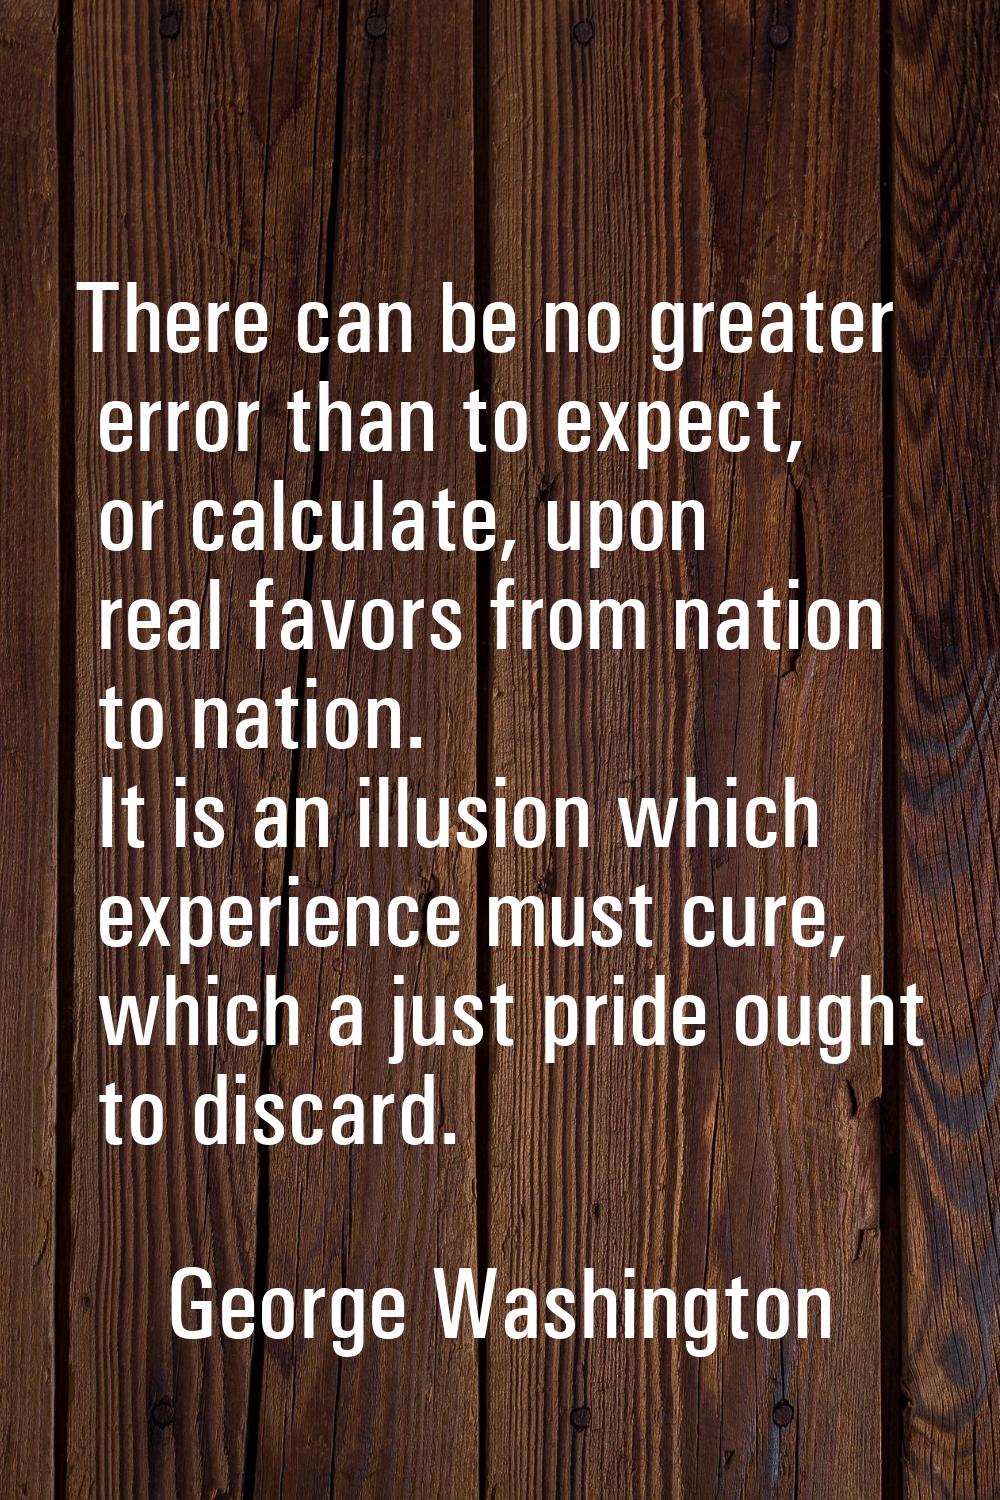 There can be no greater error than to expect, or calculate, upon real favors from nation to nation.